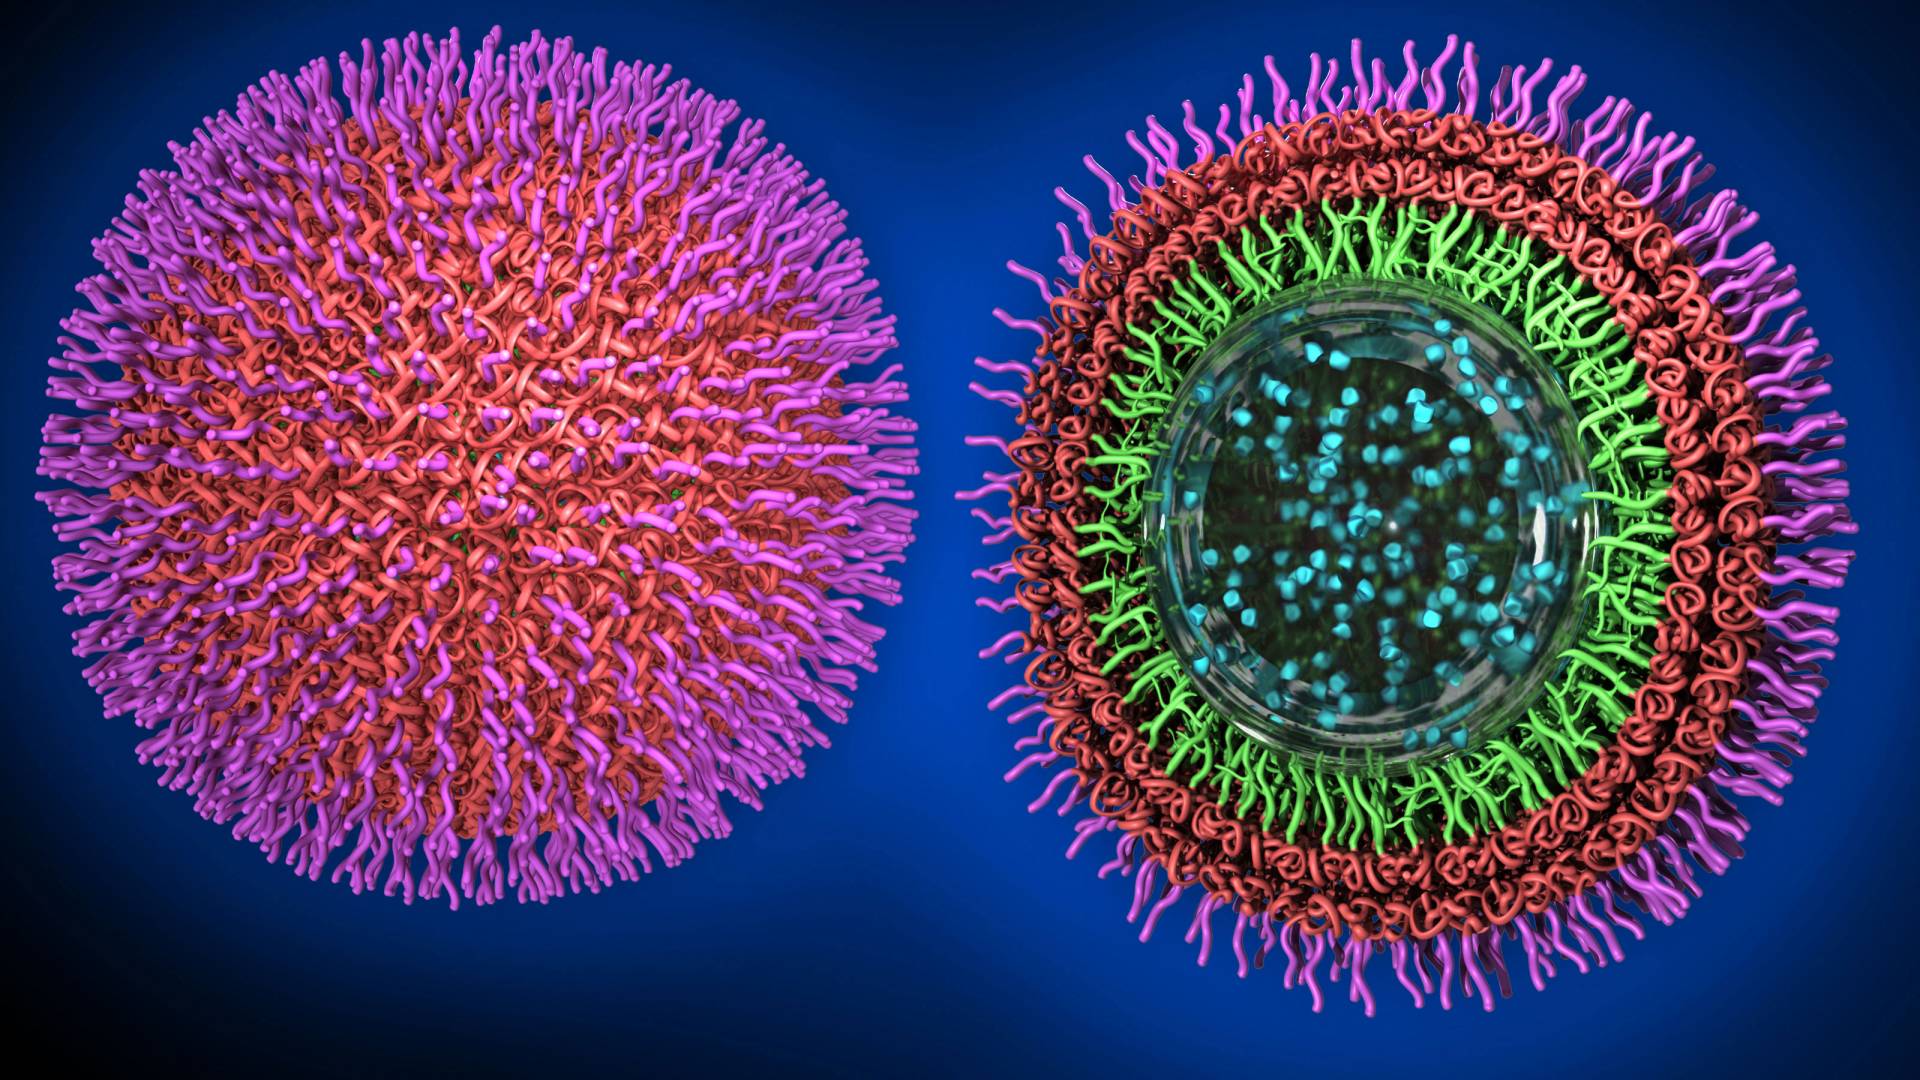 3D rendering of a nanoparticle